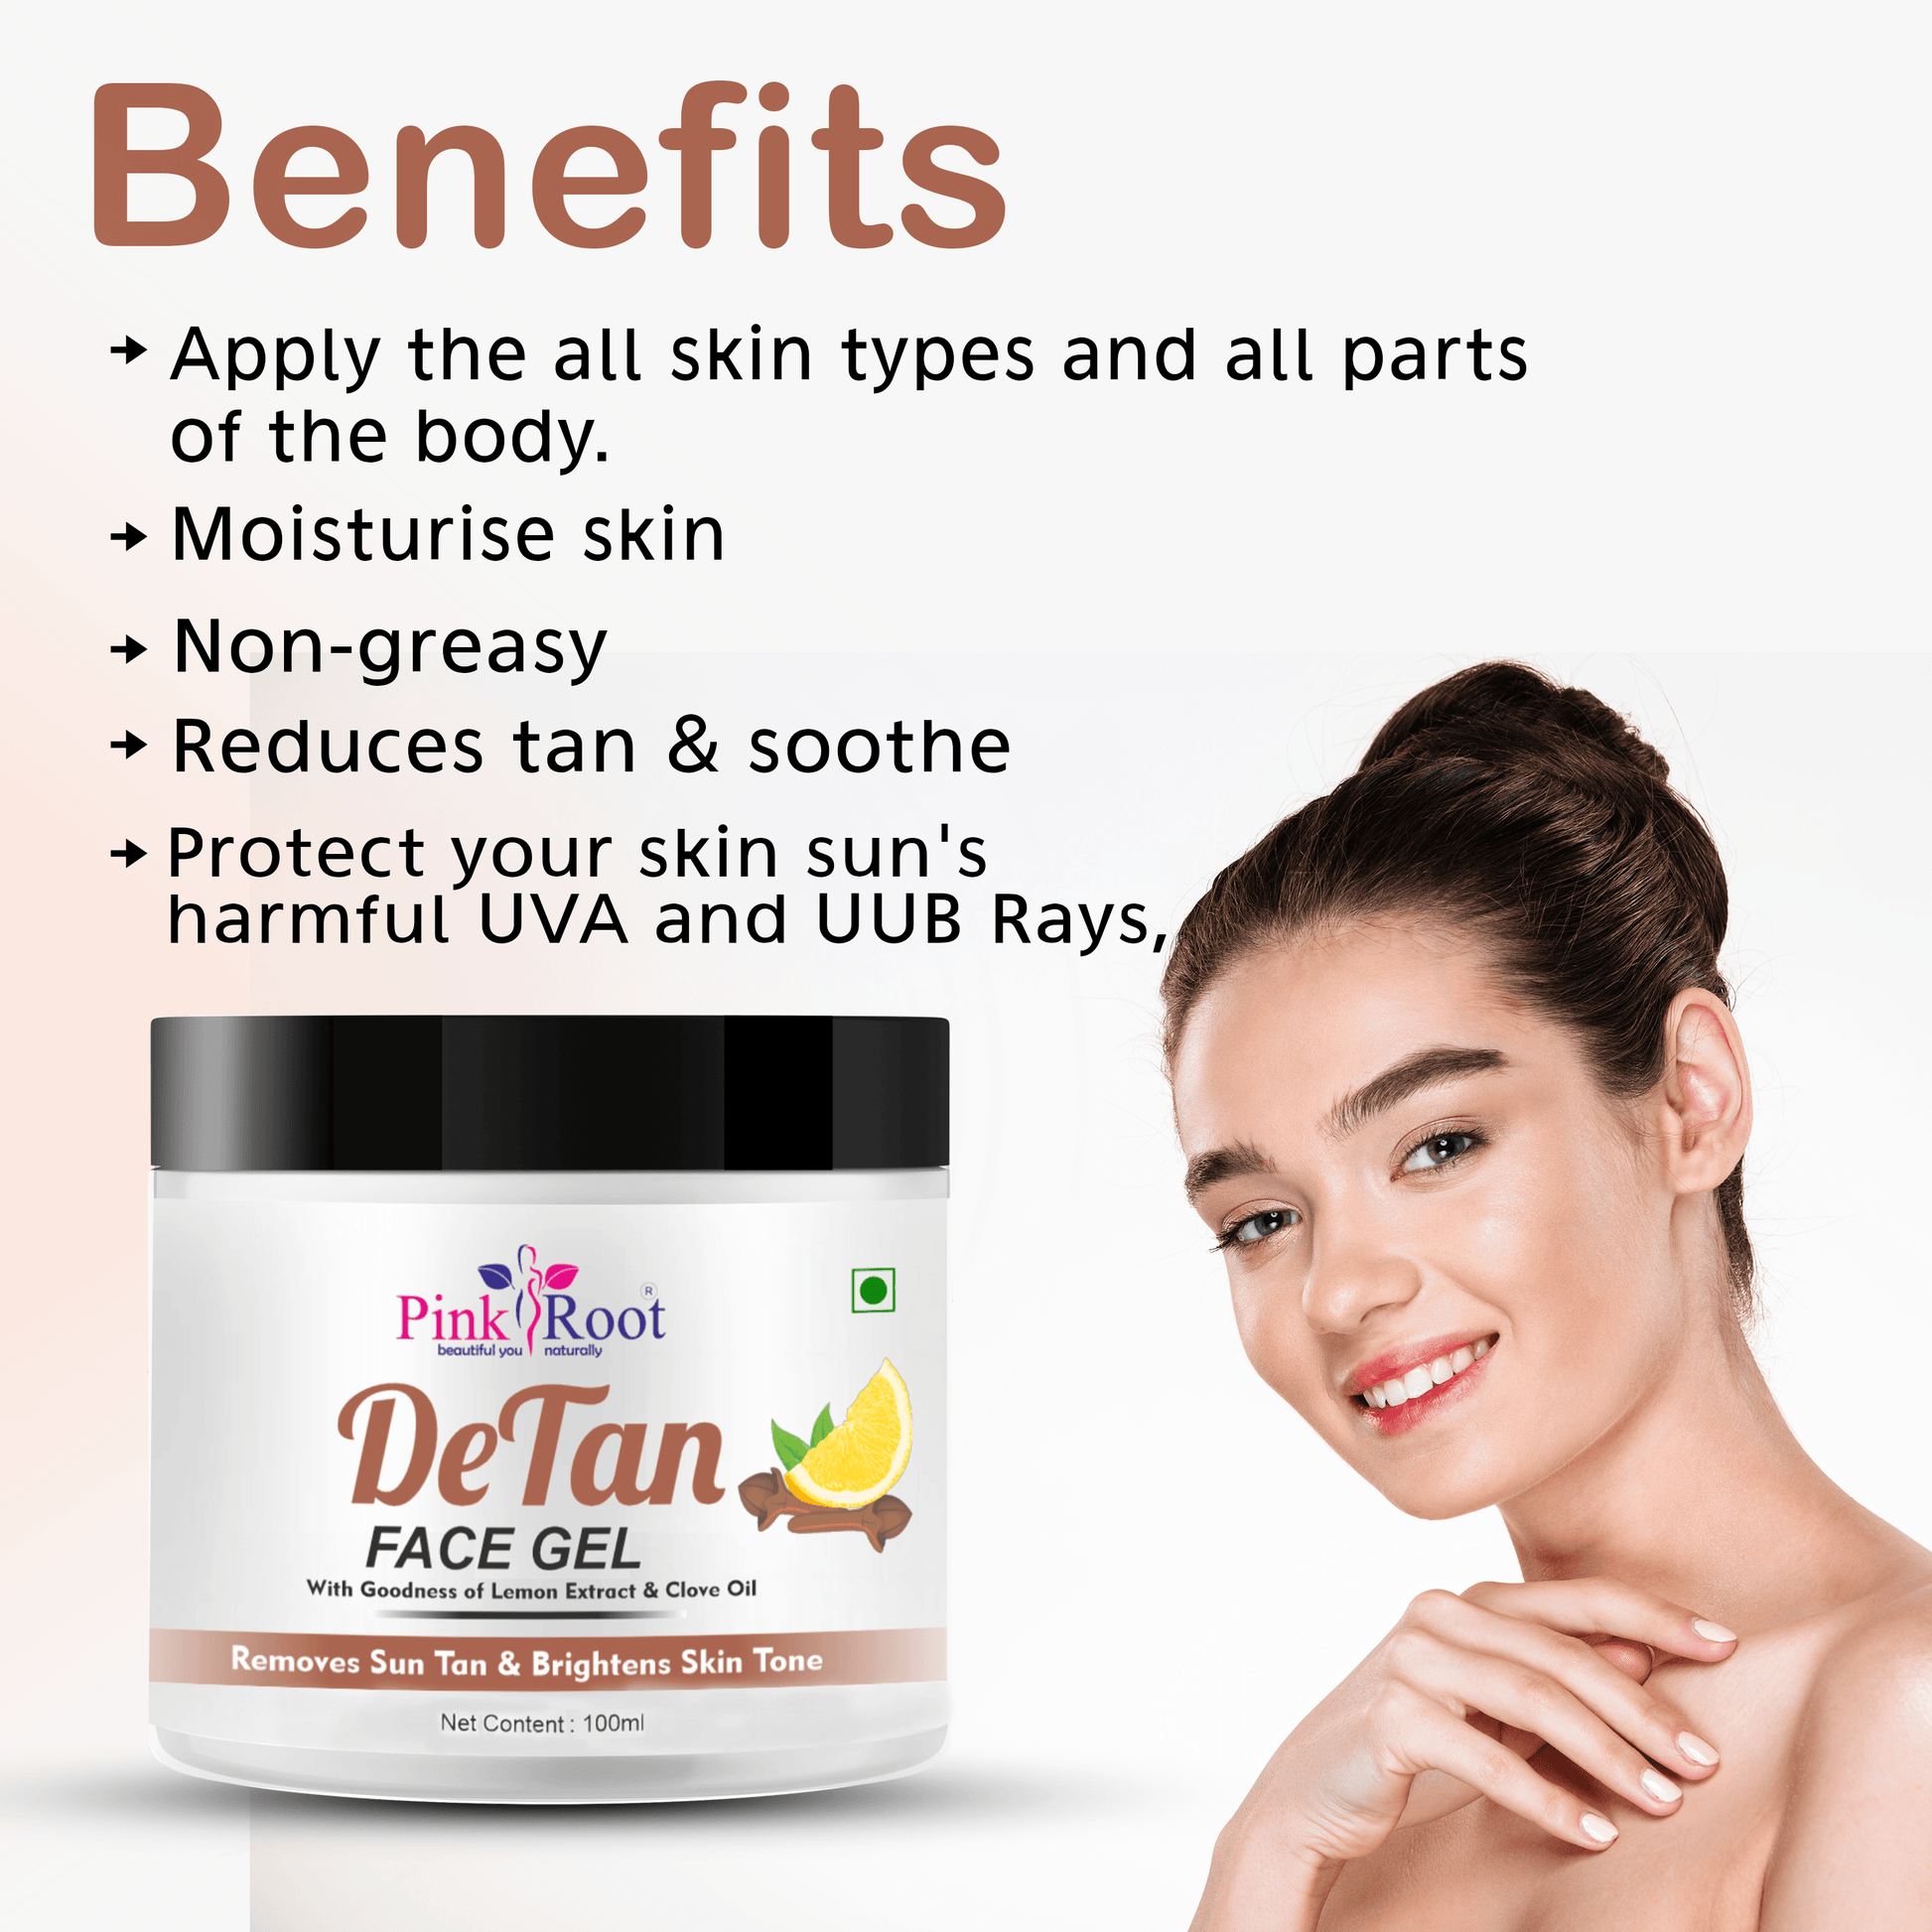 Pink Root Detan Face Gel 100ml, gives Skin Brightening, Skin Whitening Face Gel For Skin,Tan Removal, Whitening, Depigmentation, Oil Control, Acne & Fairness - Pink Root